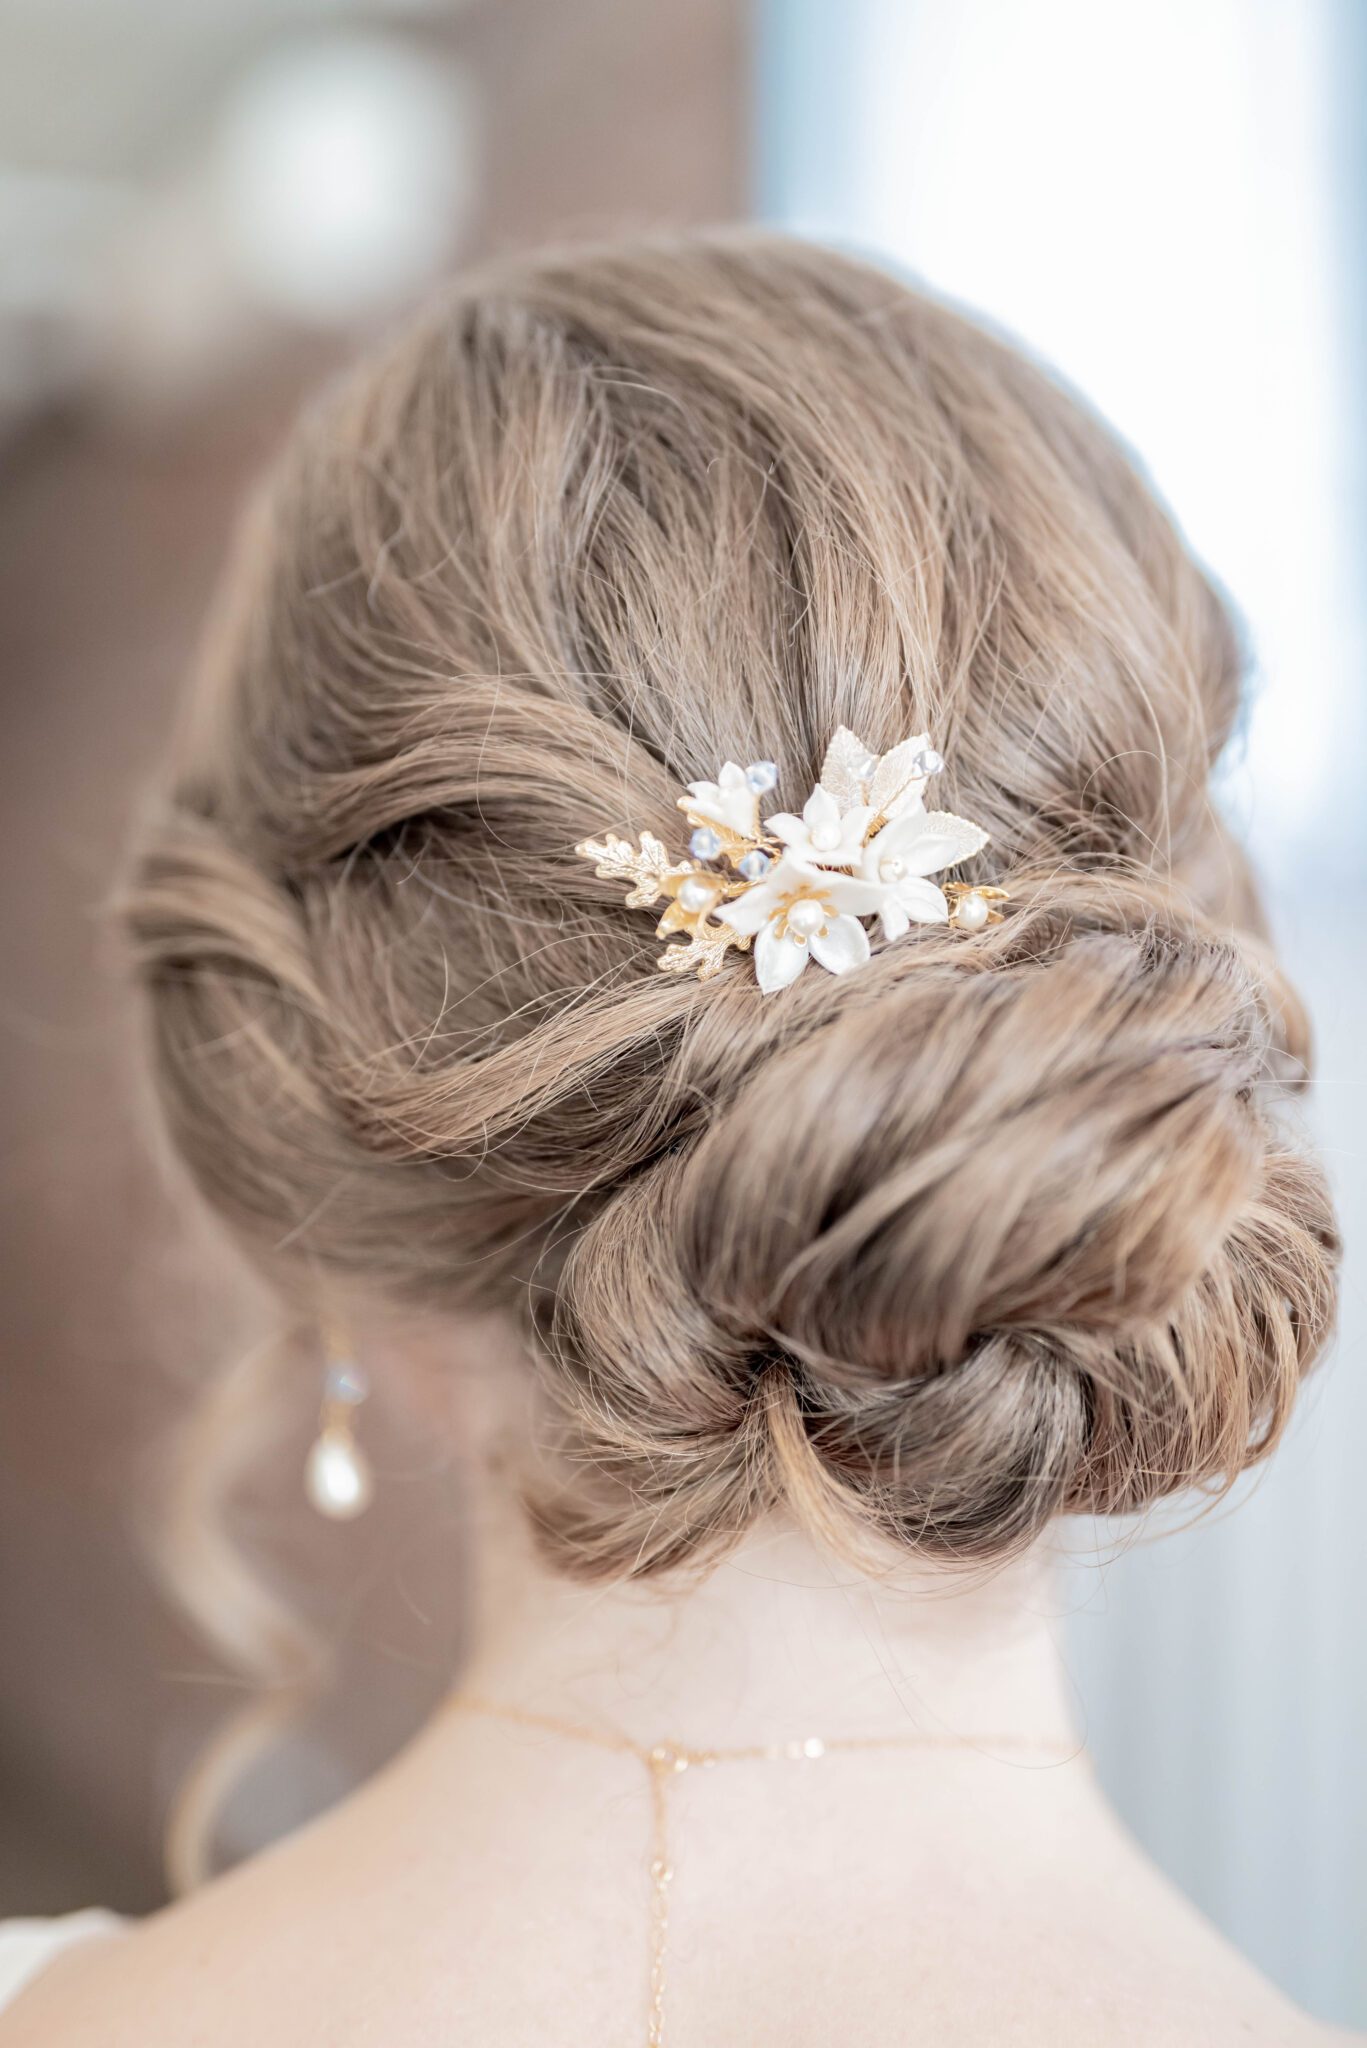 gold hair pin featuring white flowers, gold leaves and small baby blue accents in bridal up-do, romantic low-bun hairstyle for bride